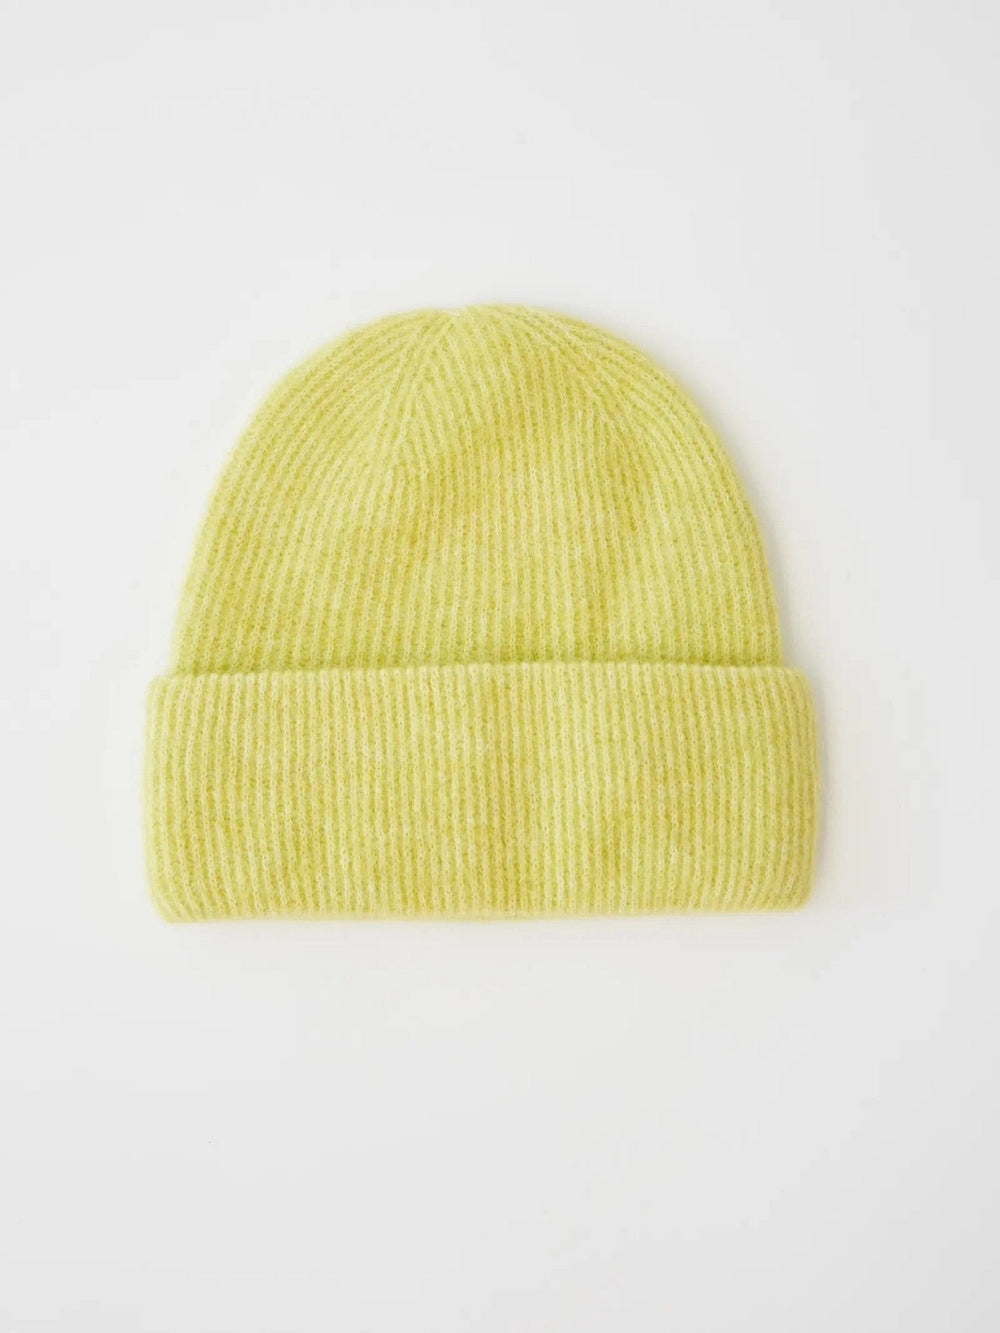 White Stuff Lime Green Ribbed Beanie - Crabtree Cottage